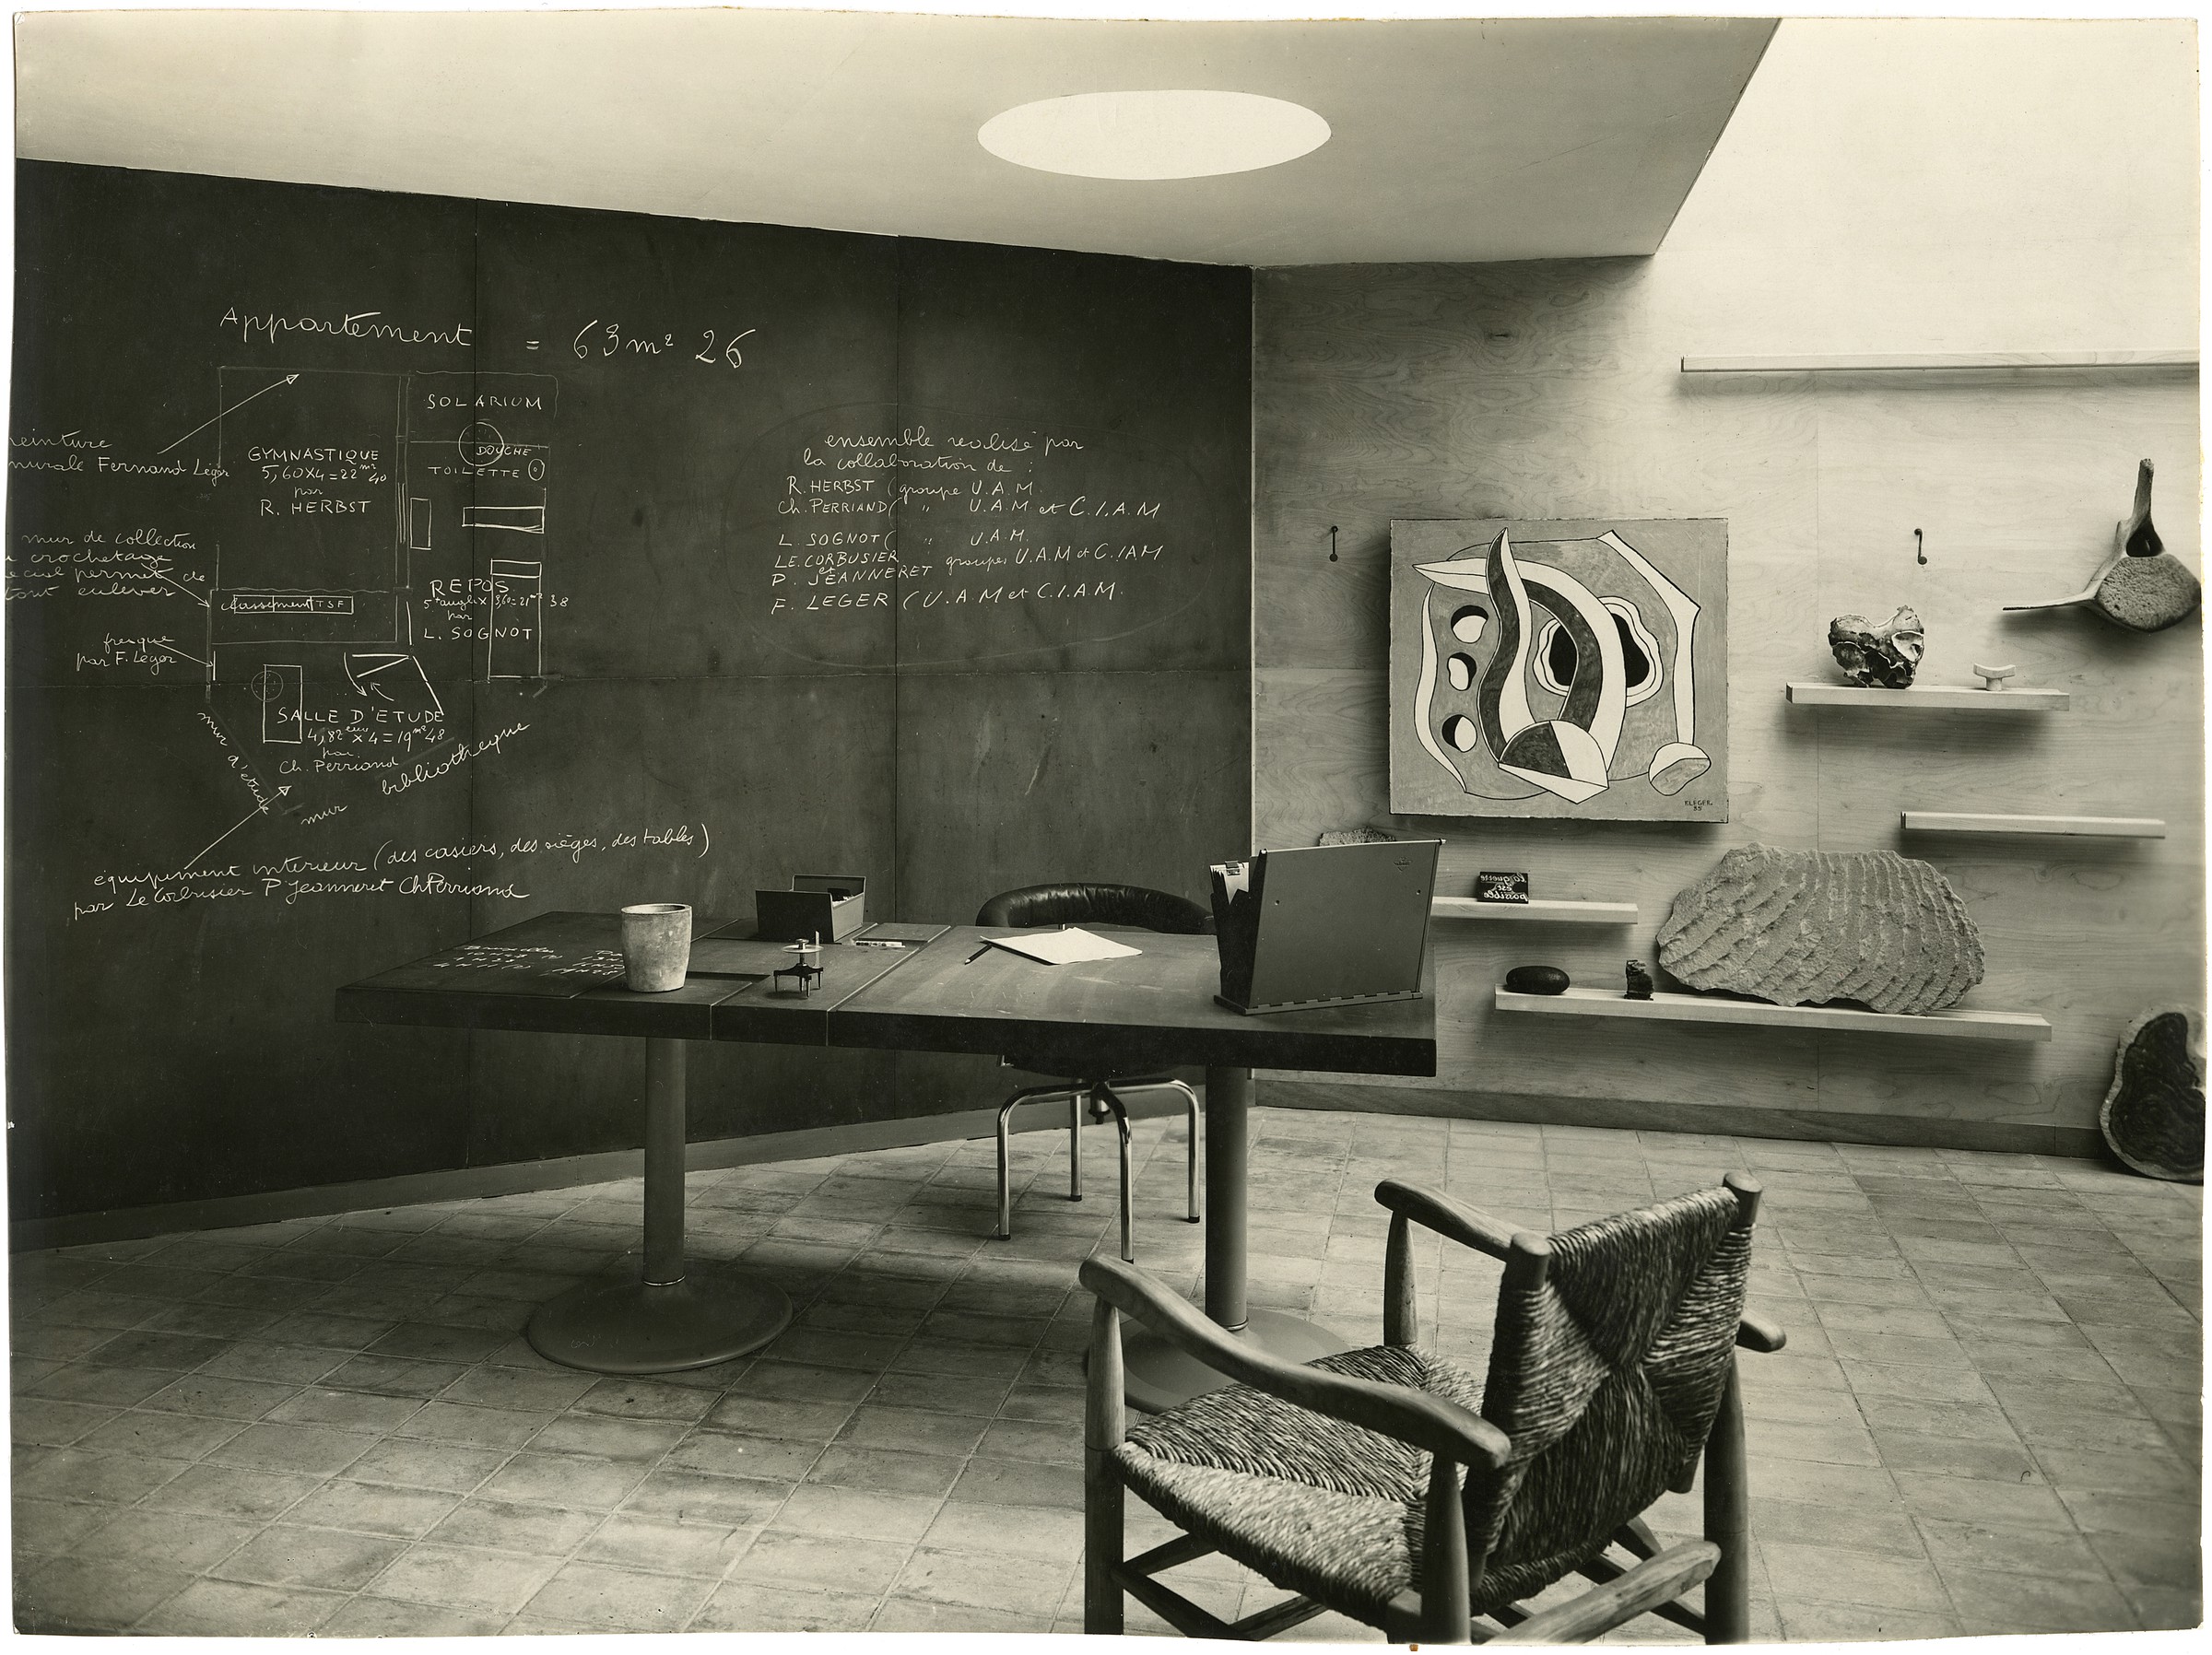 Charlotte Perriand Inventing A New World